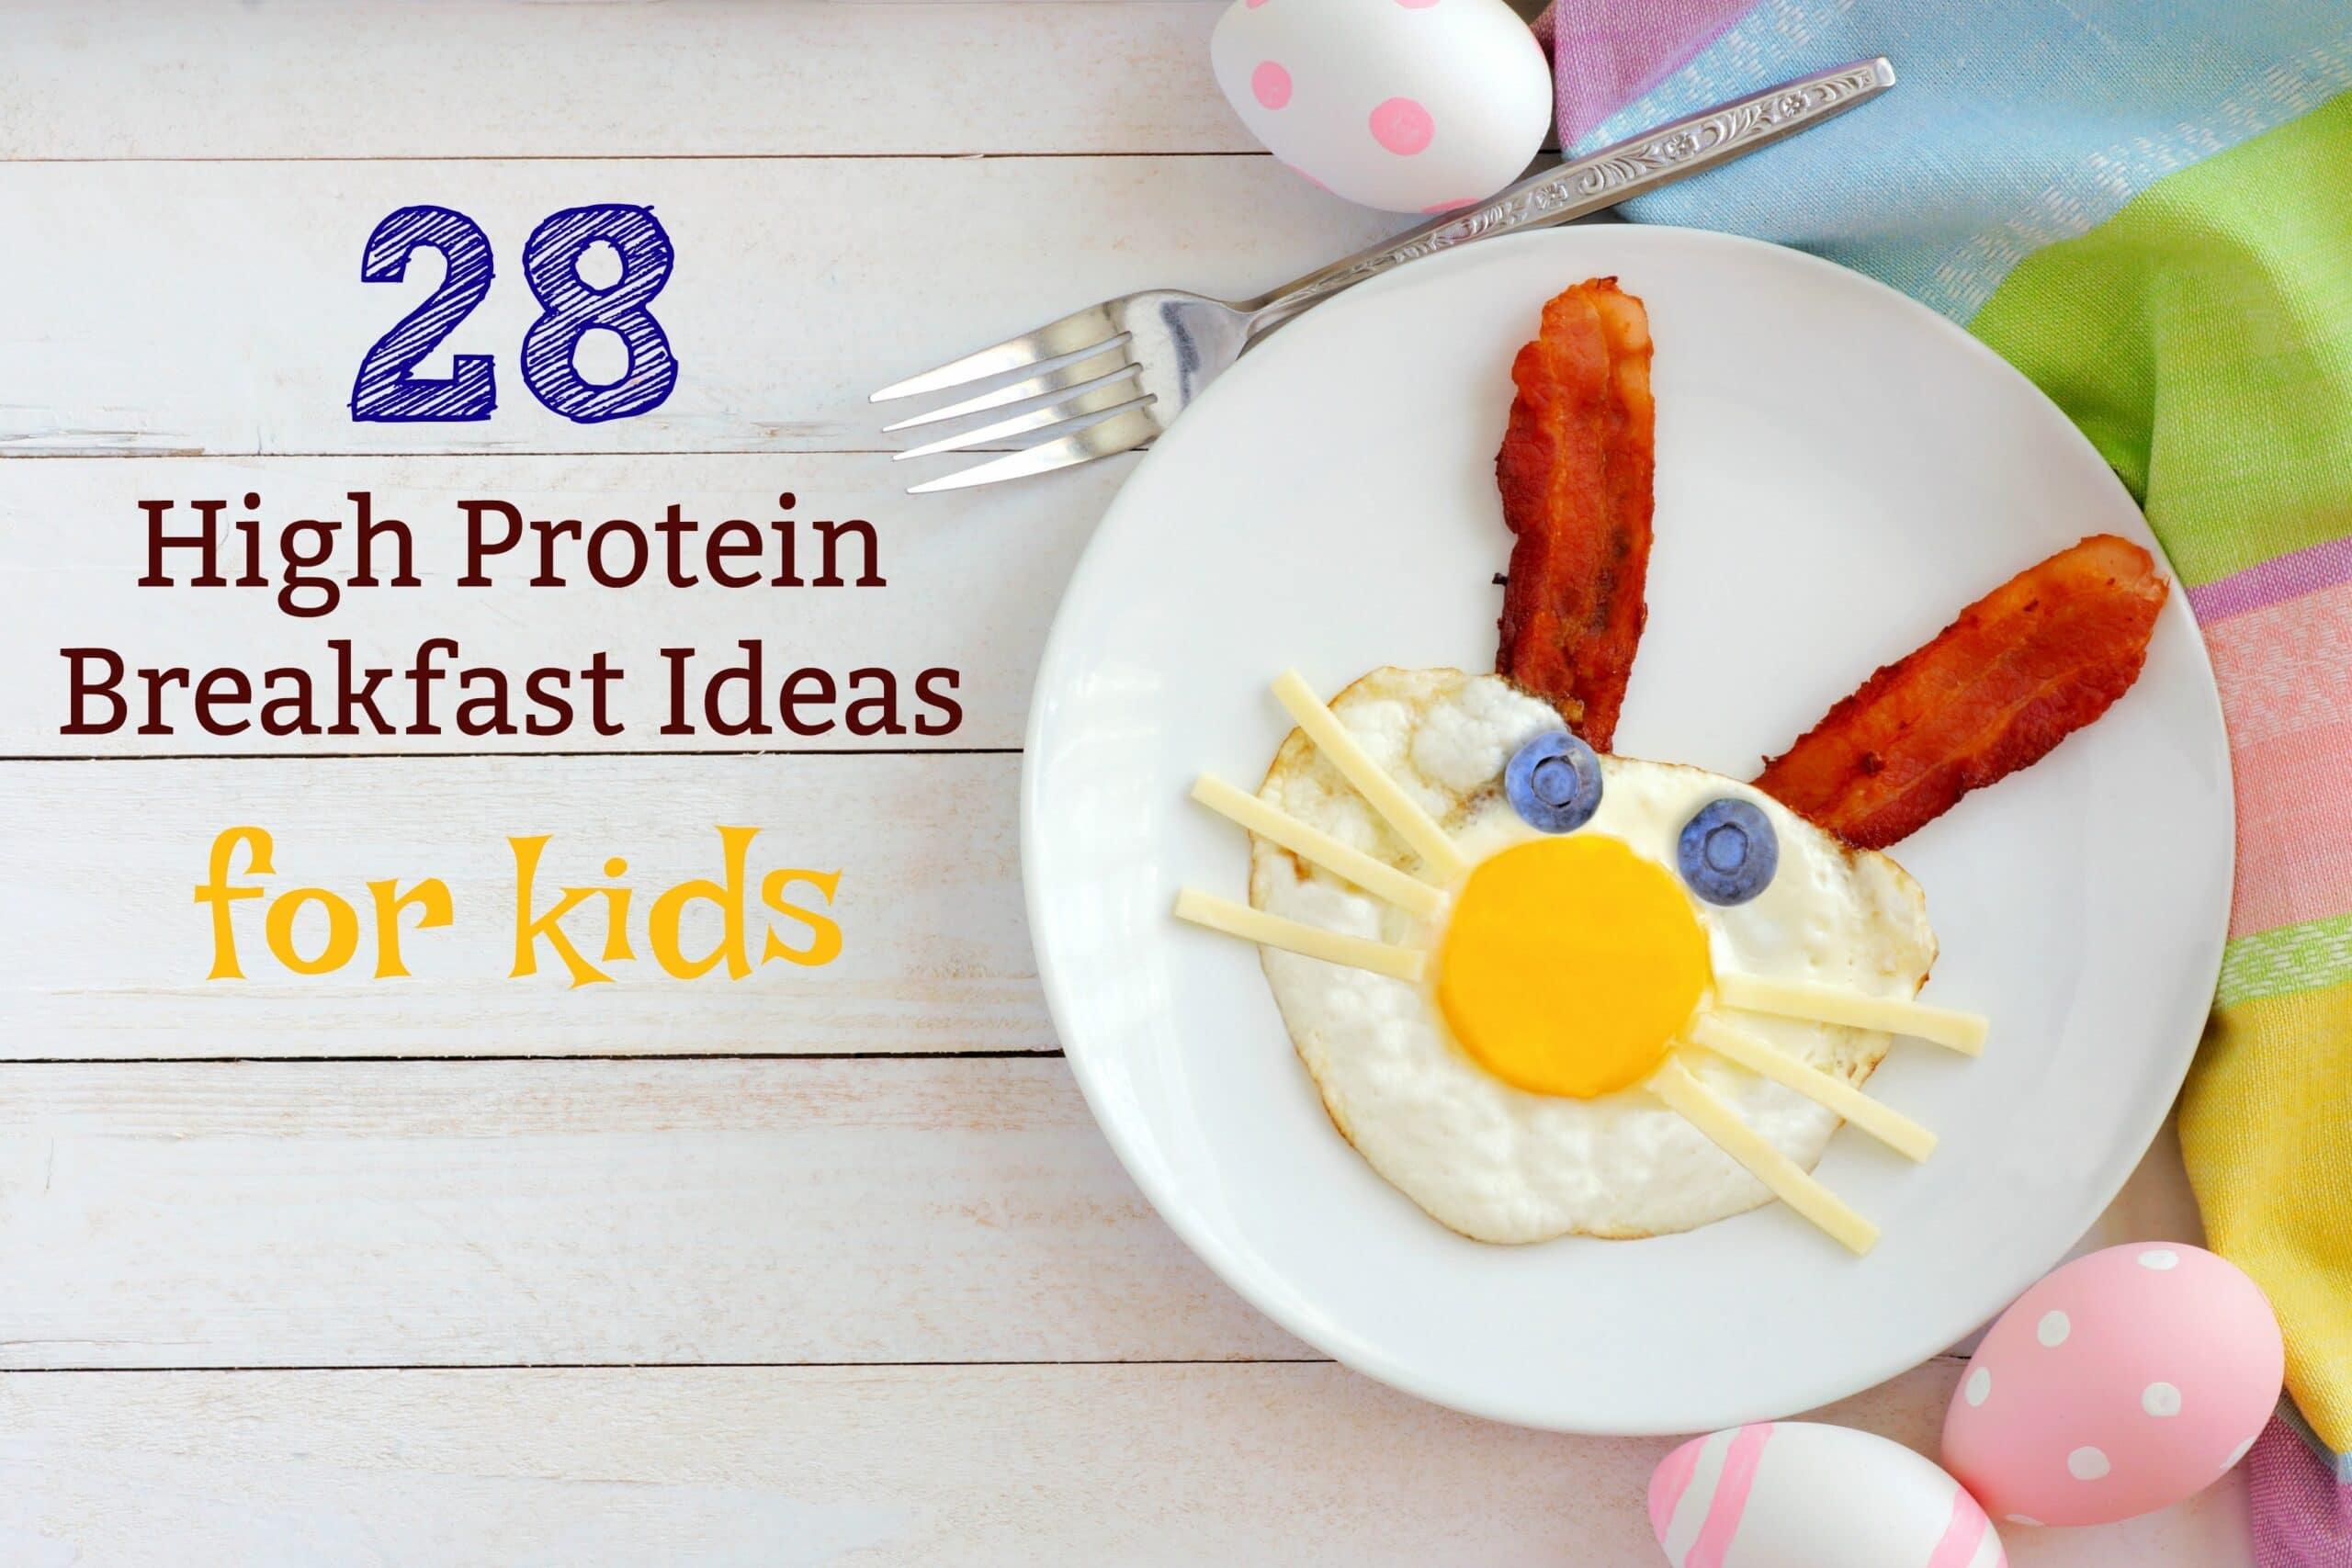 Protein Shakes for Kids: 5 Healthy Recipes